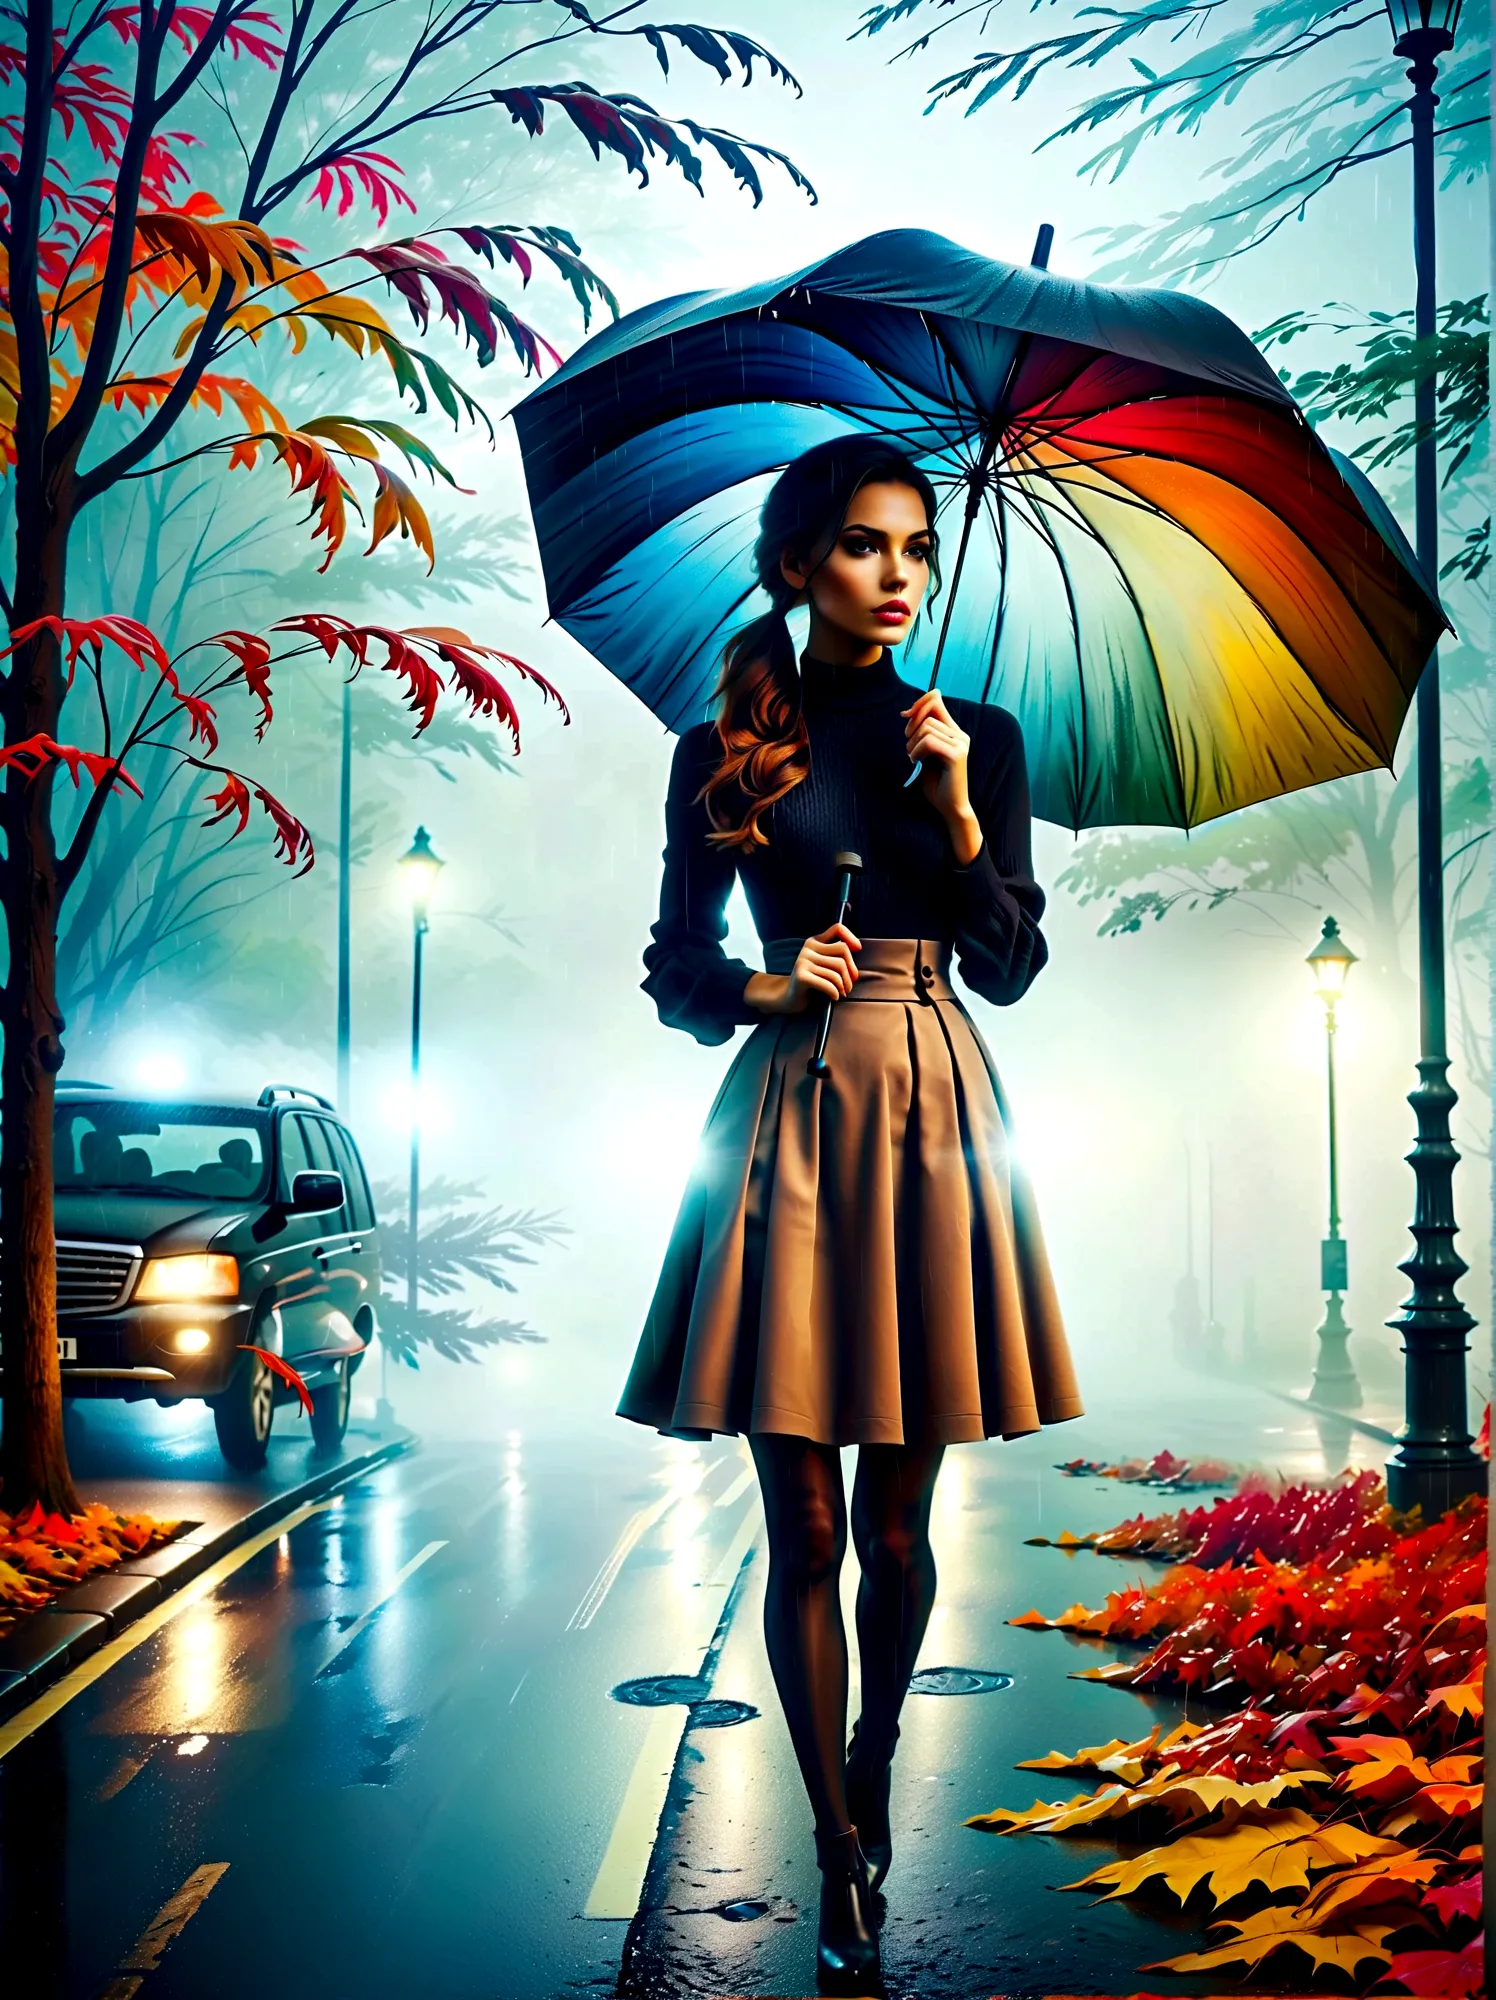 Woman in tight dress with umbrella in hand, in einer mistyen Stadt, colorful autumn leaves on the street, a picture by Kuno Veeb...